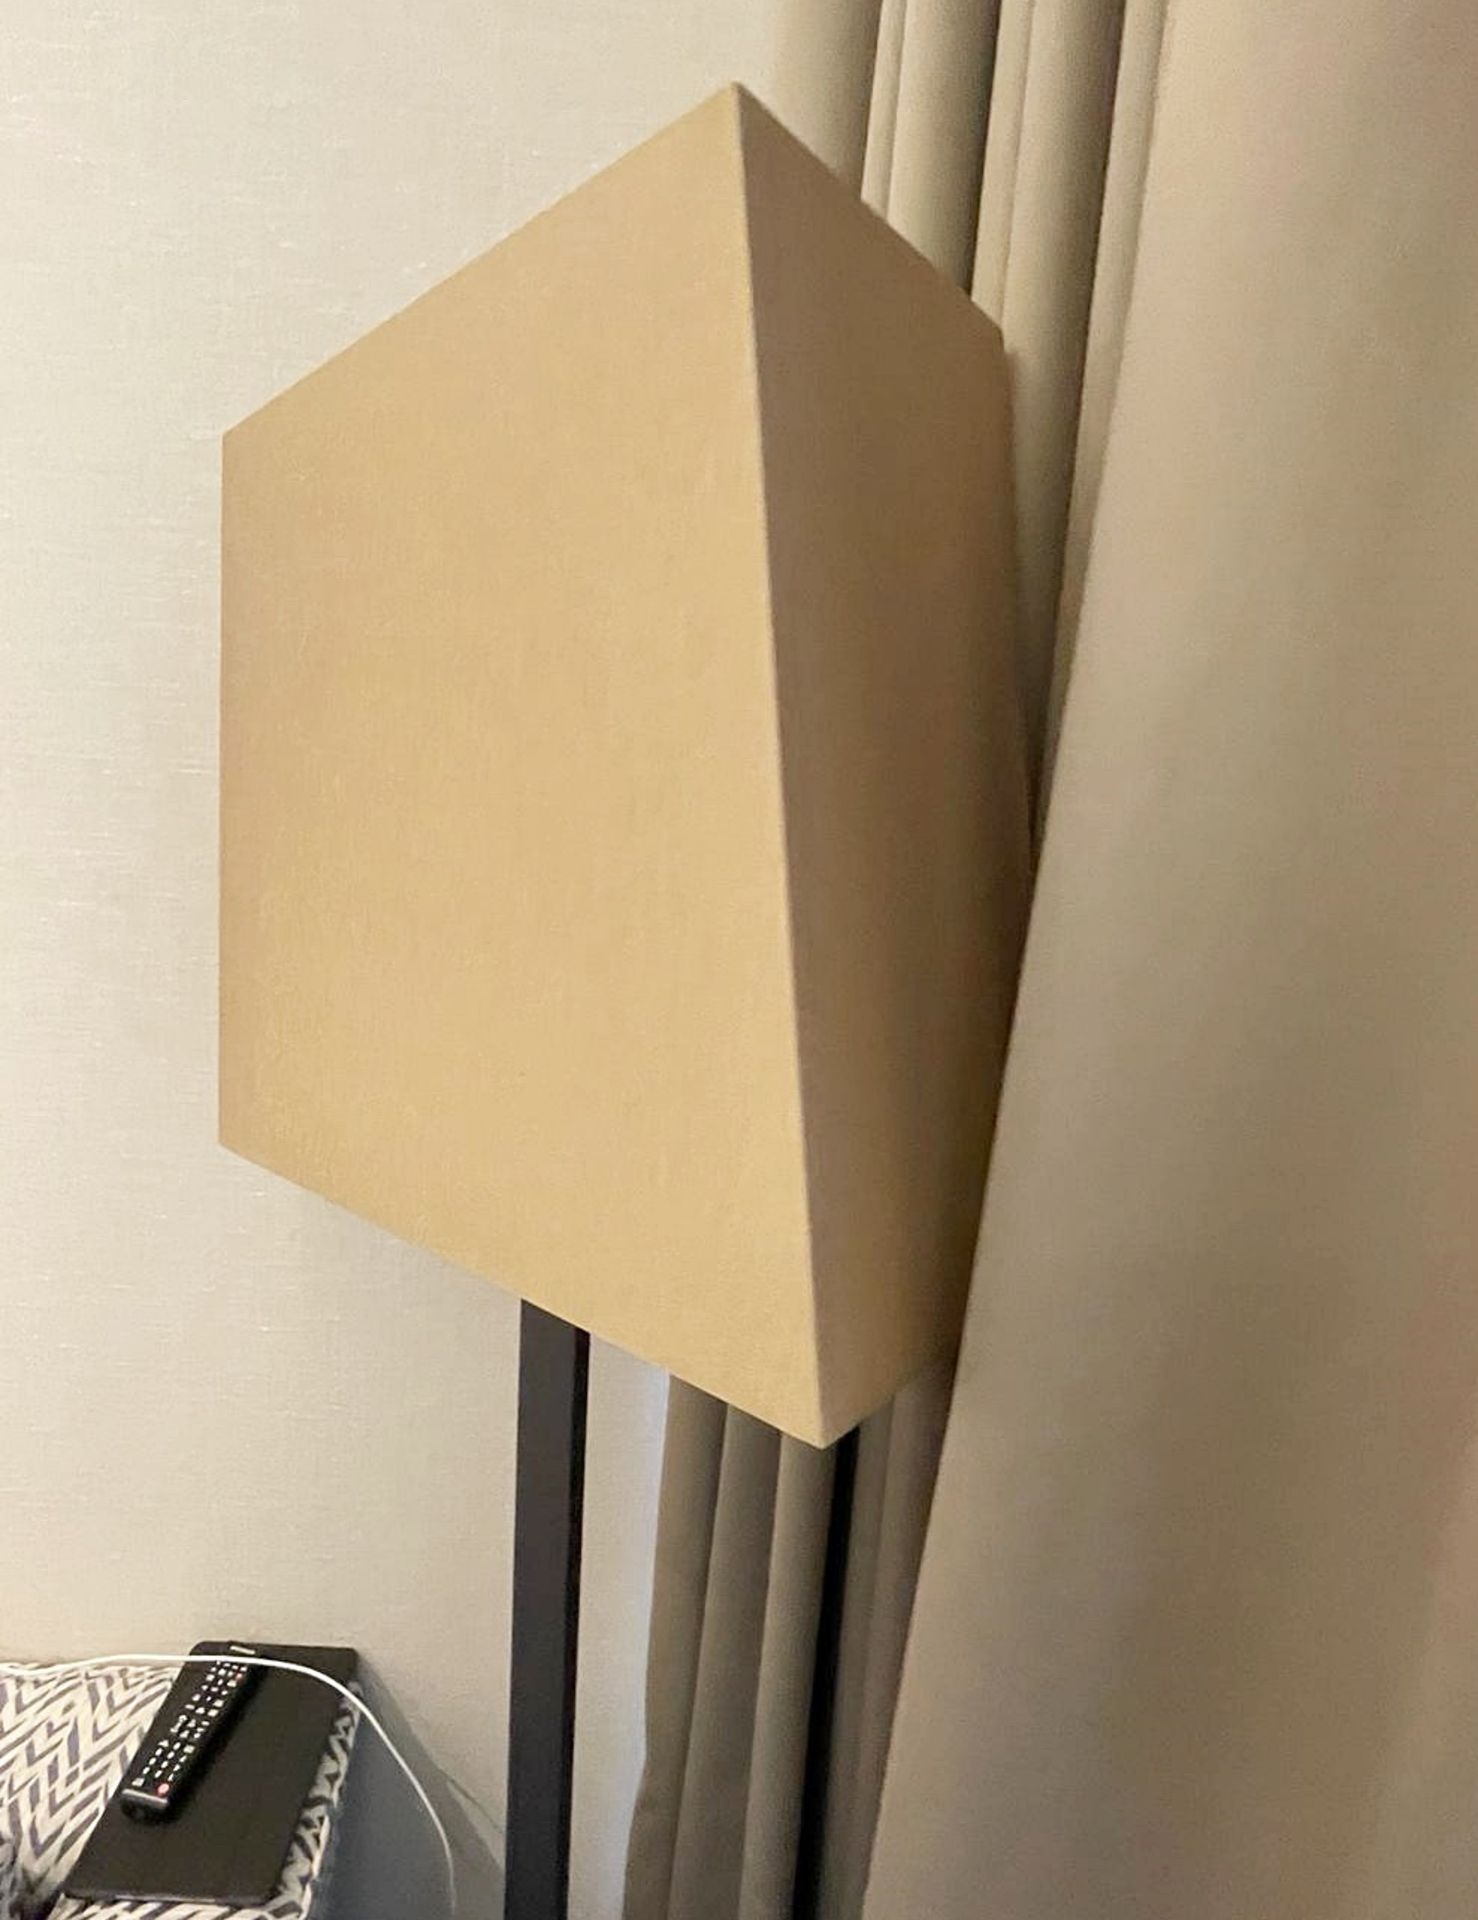 A Pair of Slender Profile Floor Lamps with Modern Angular Shades and Bronzed Finish - Image 4 of 11